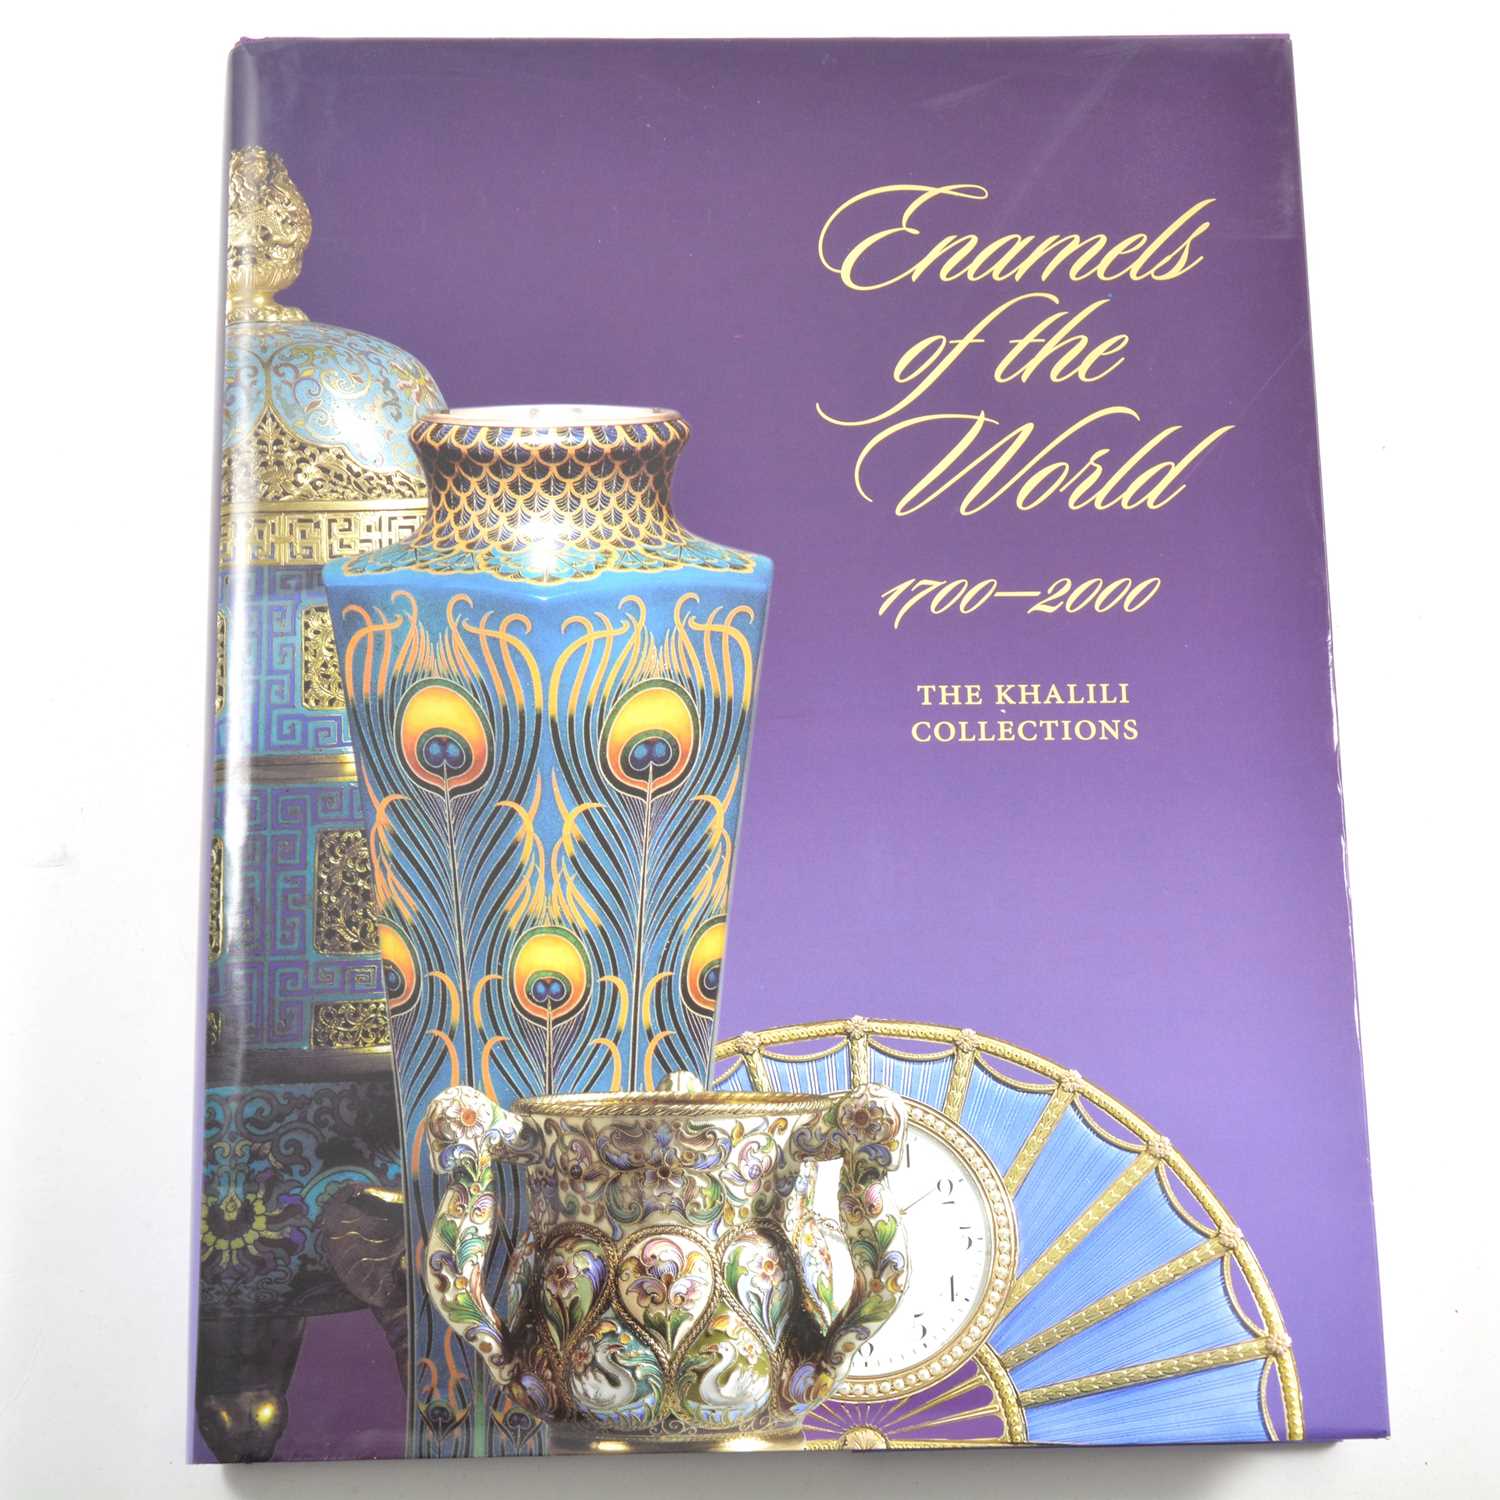 Lot 249 - Haydn Williams, Enamels of The World 1700-2000, The Khalili Collections, a bound volume.